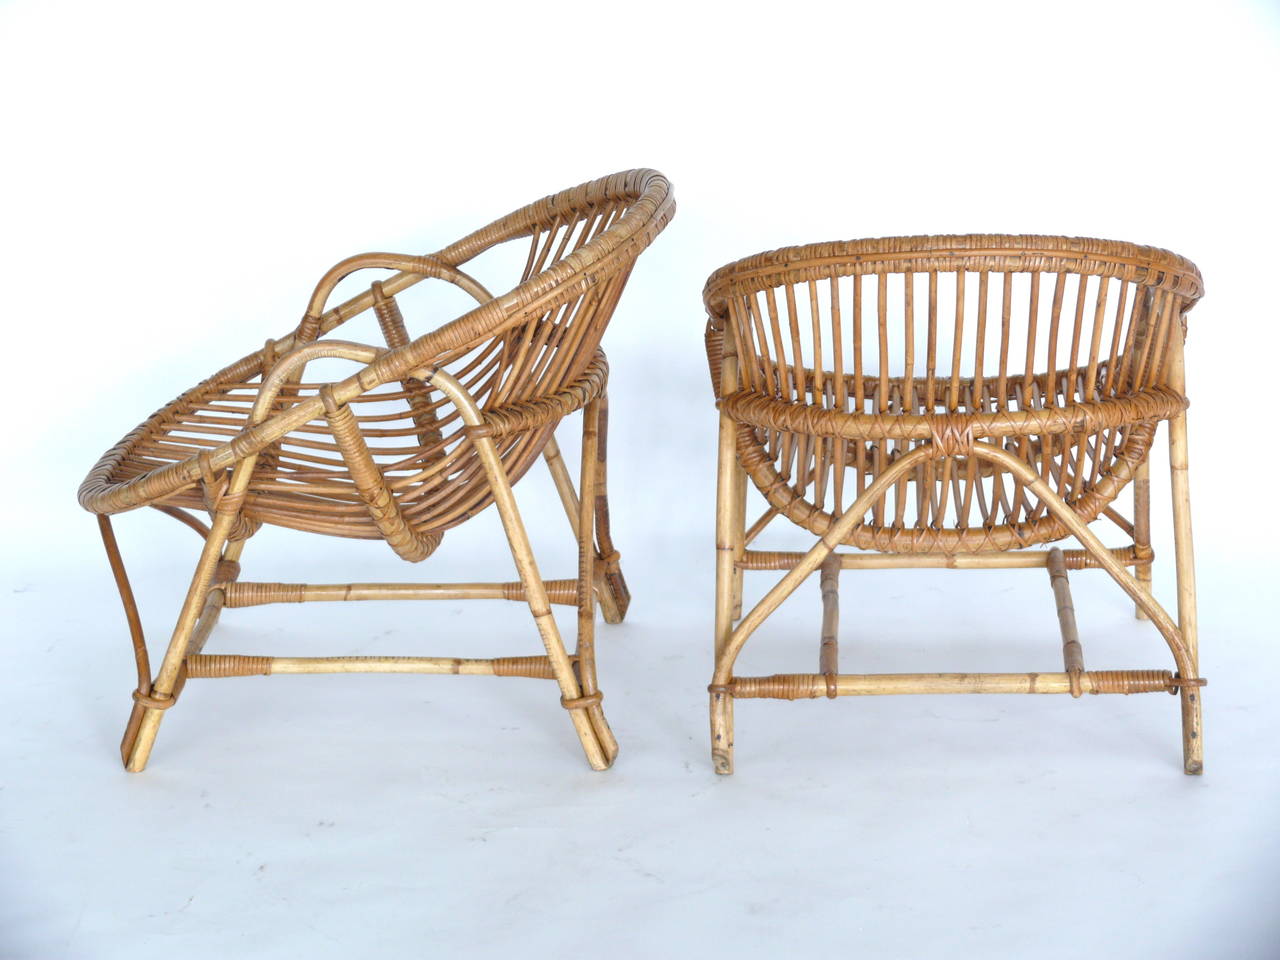 Sculptural pair of Rattan Chairs made in France. Bamboo frame with rattan seat and detail. Unique shape and low profile. Chairs are in excellent vintage condition